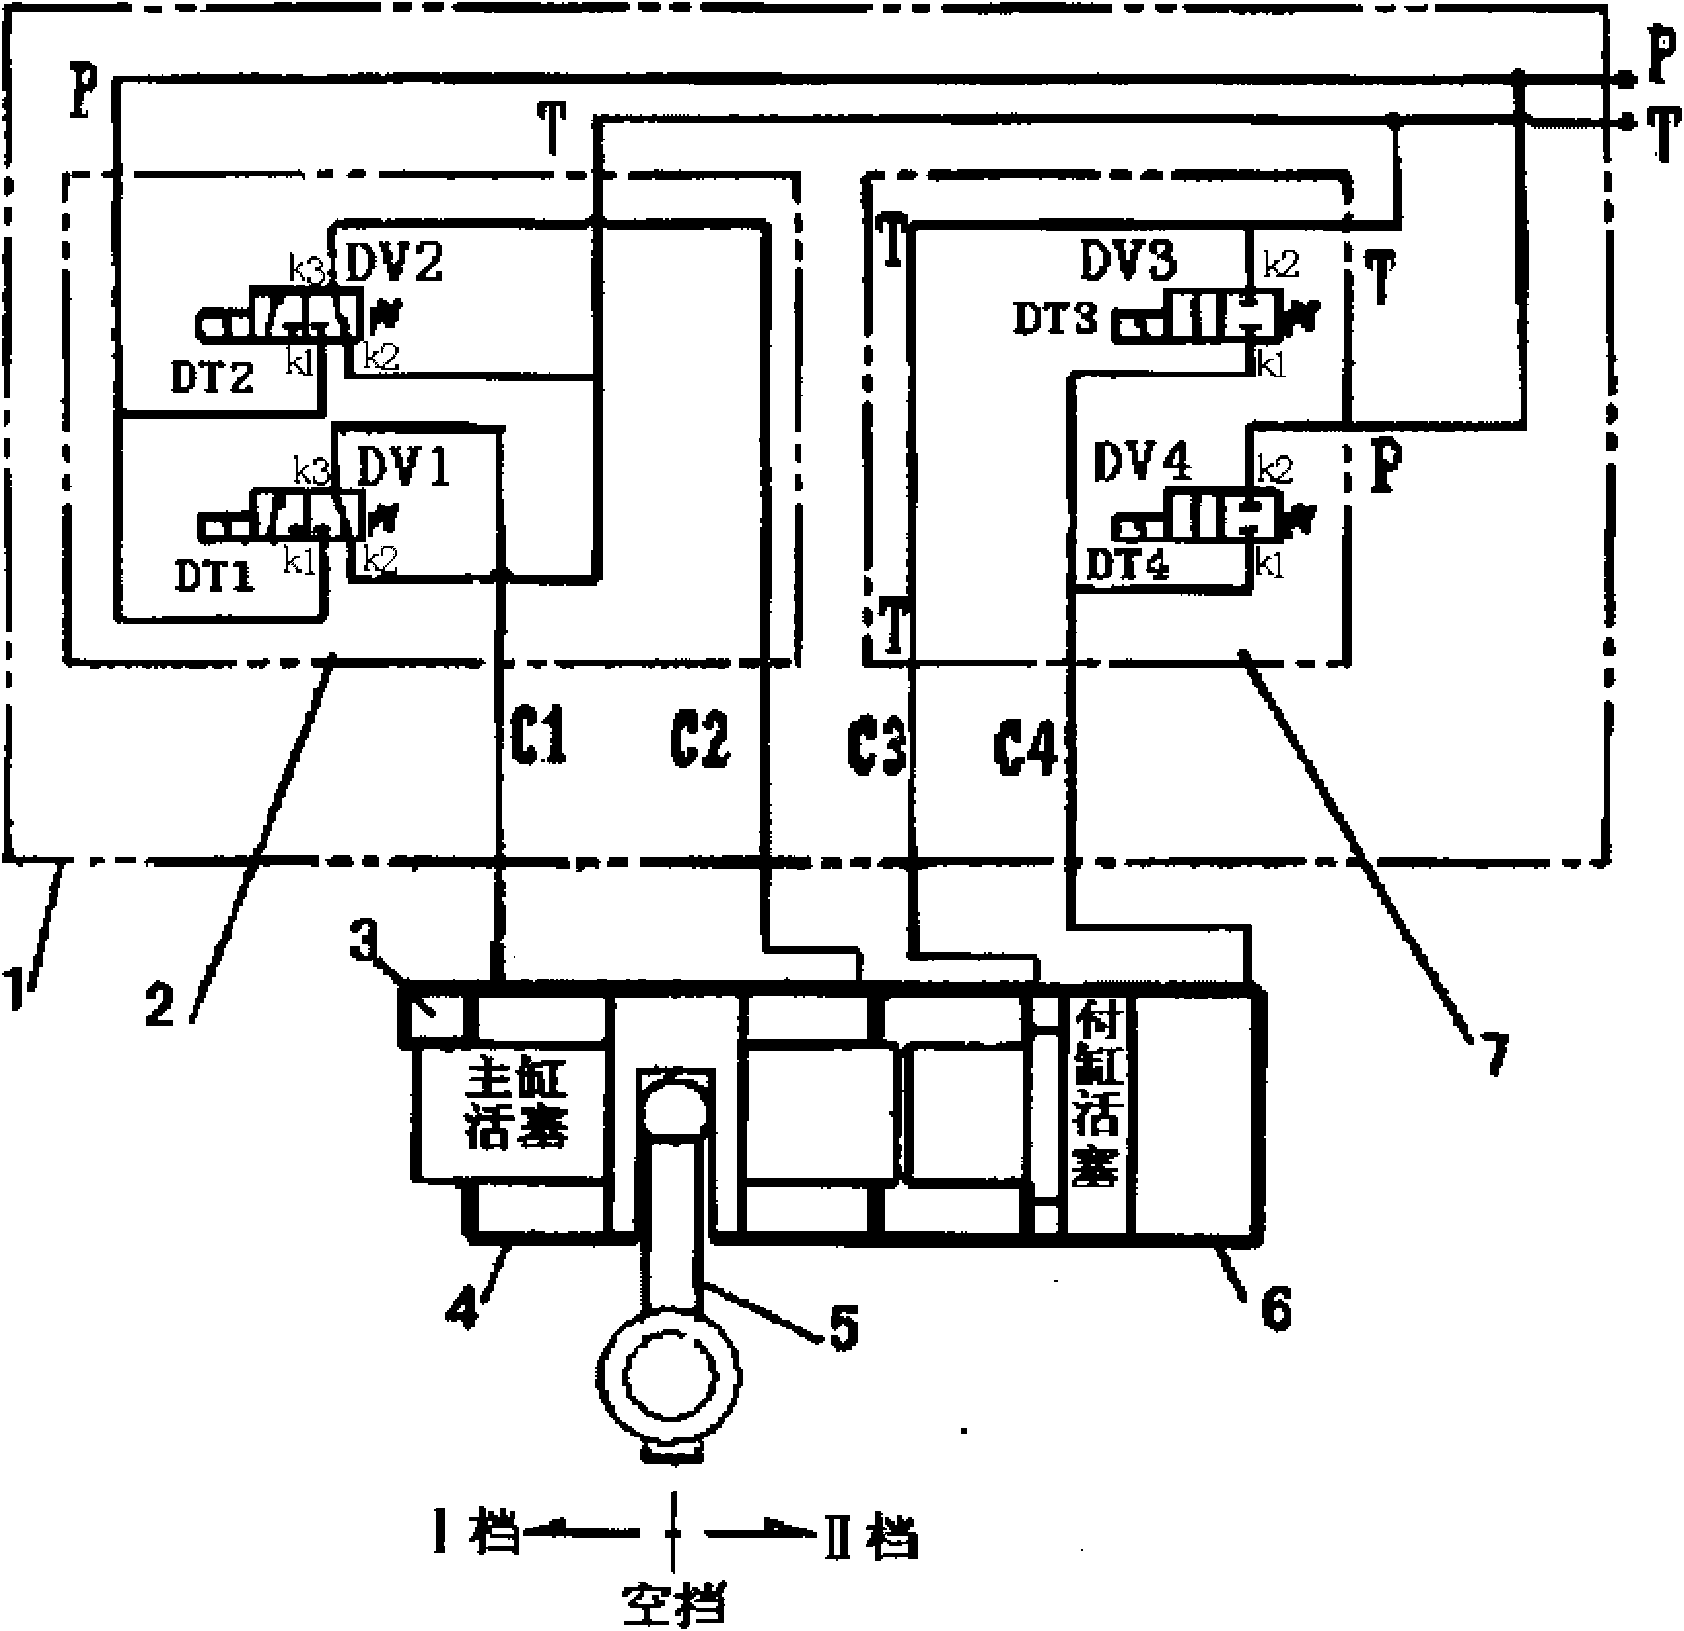 Hydraulic control system for gear shifting of manual gearbox